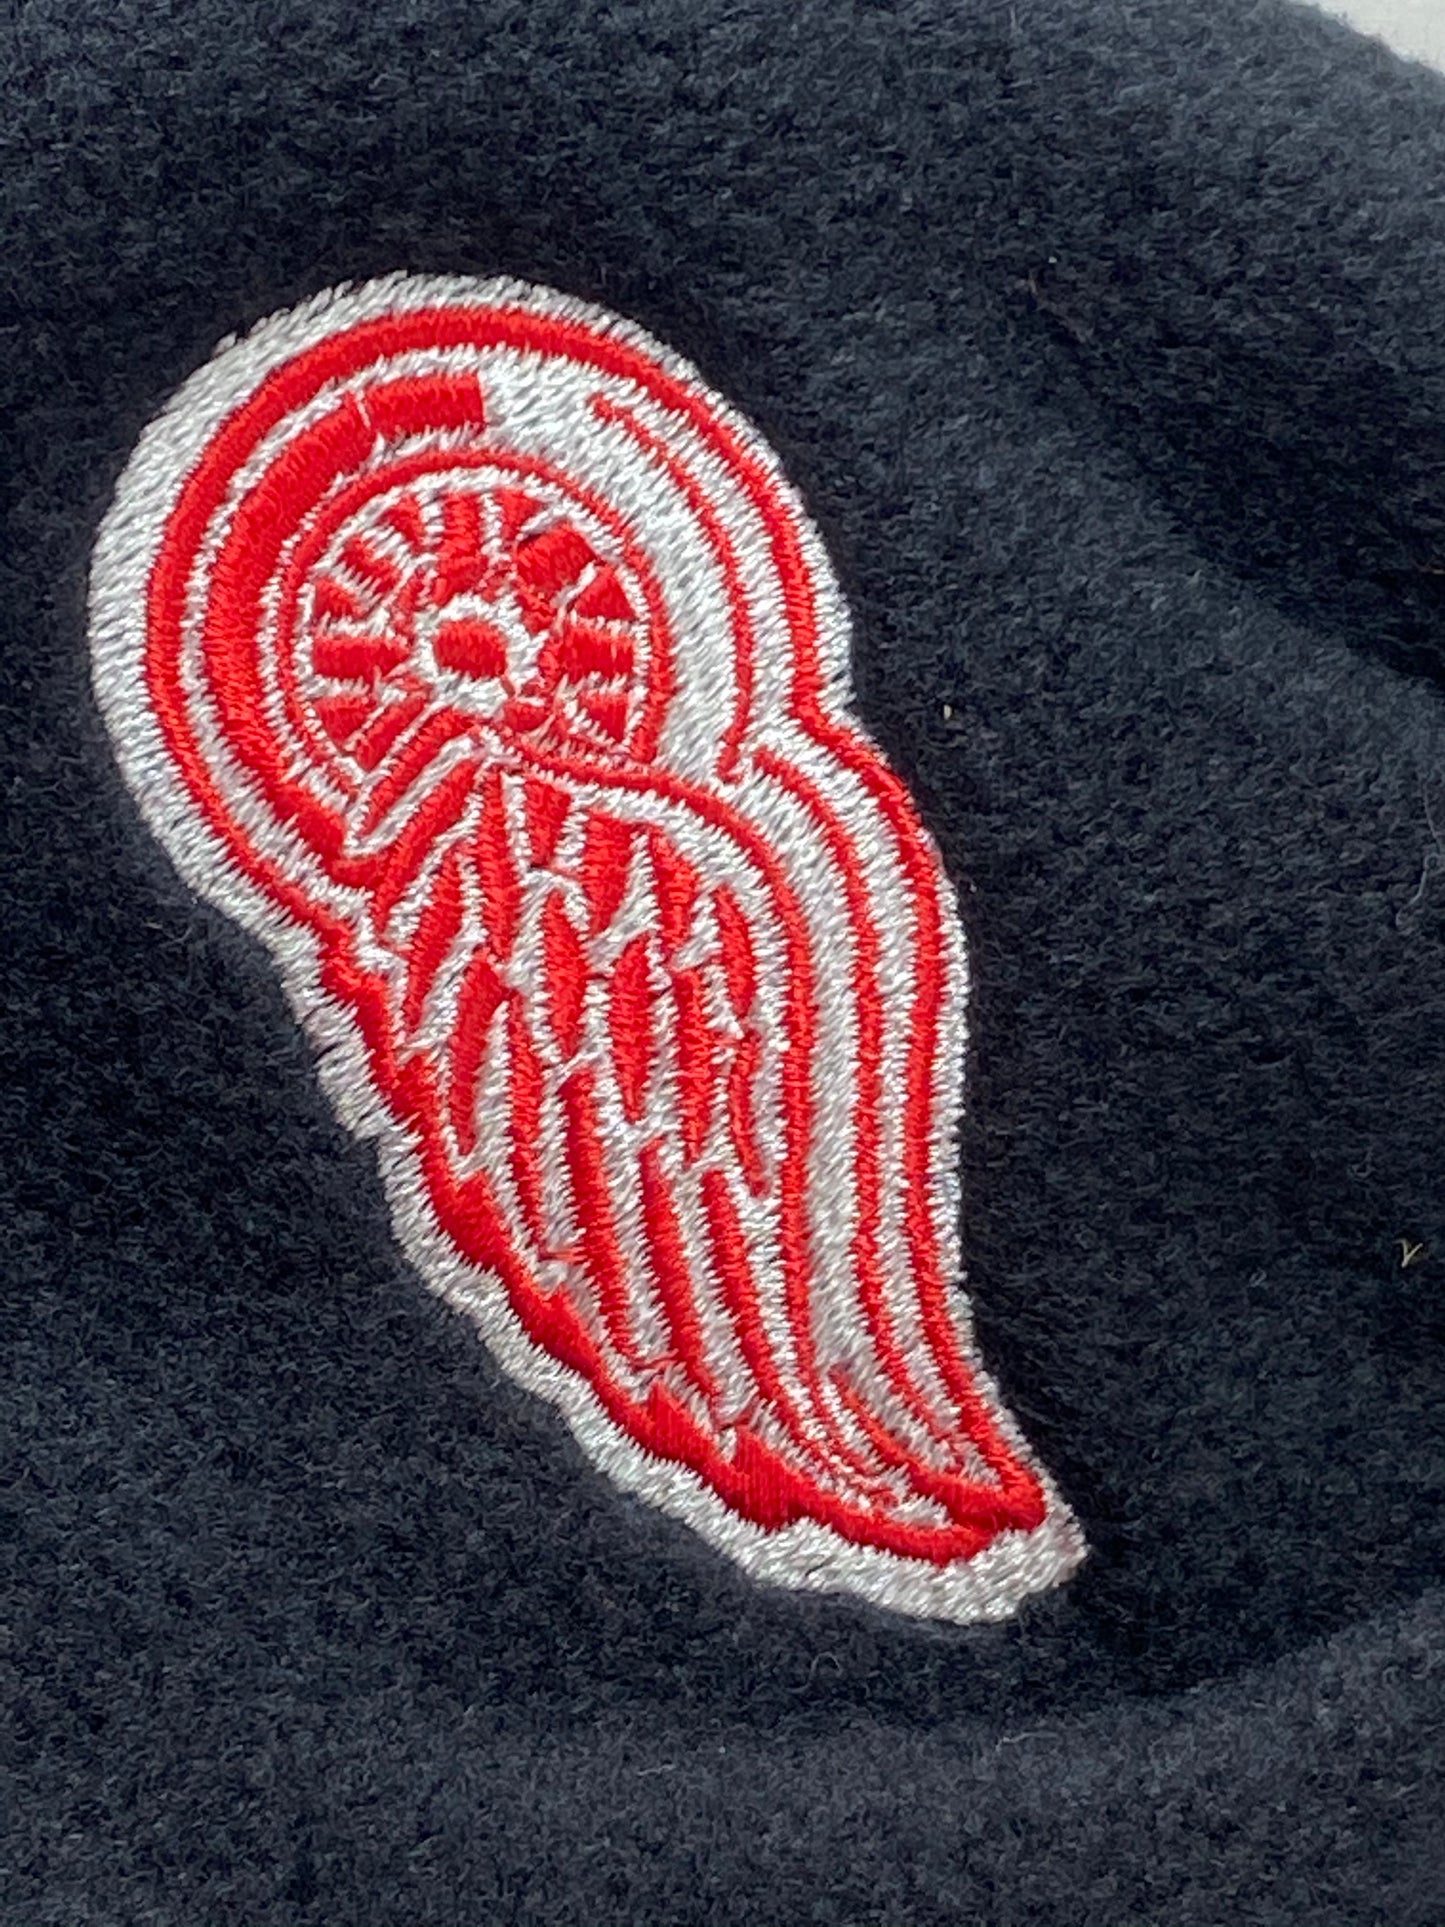 Detroit Red Wings Vintage NHL Adult Fleece Mittens by Drew Pearson Marketing